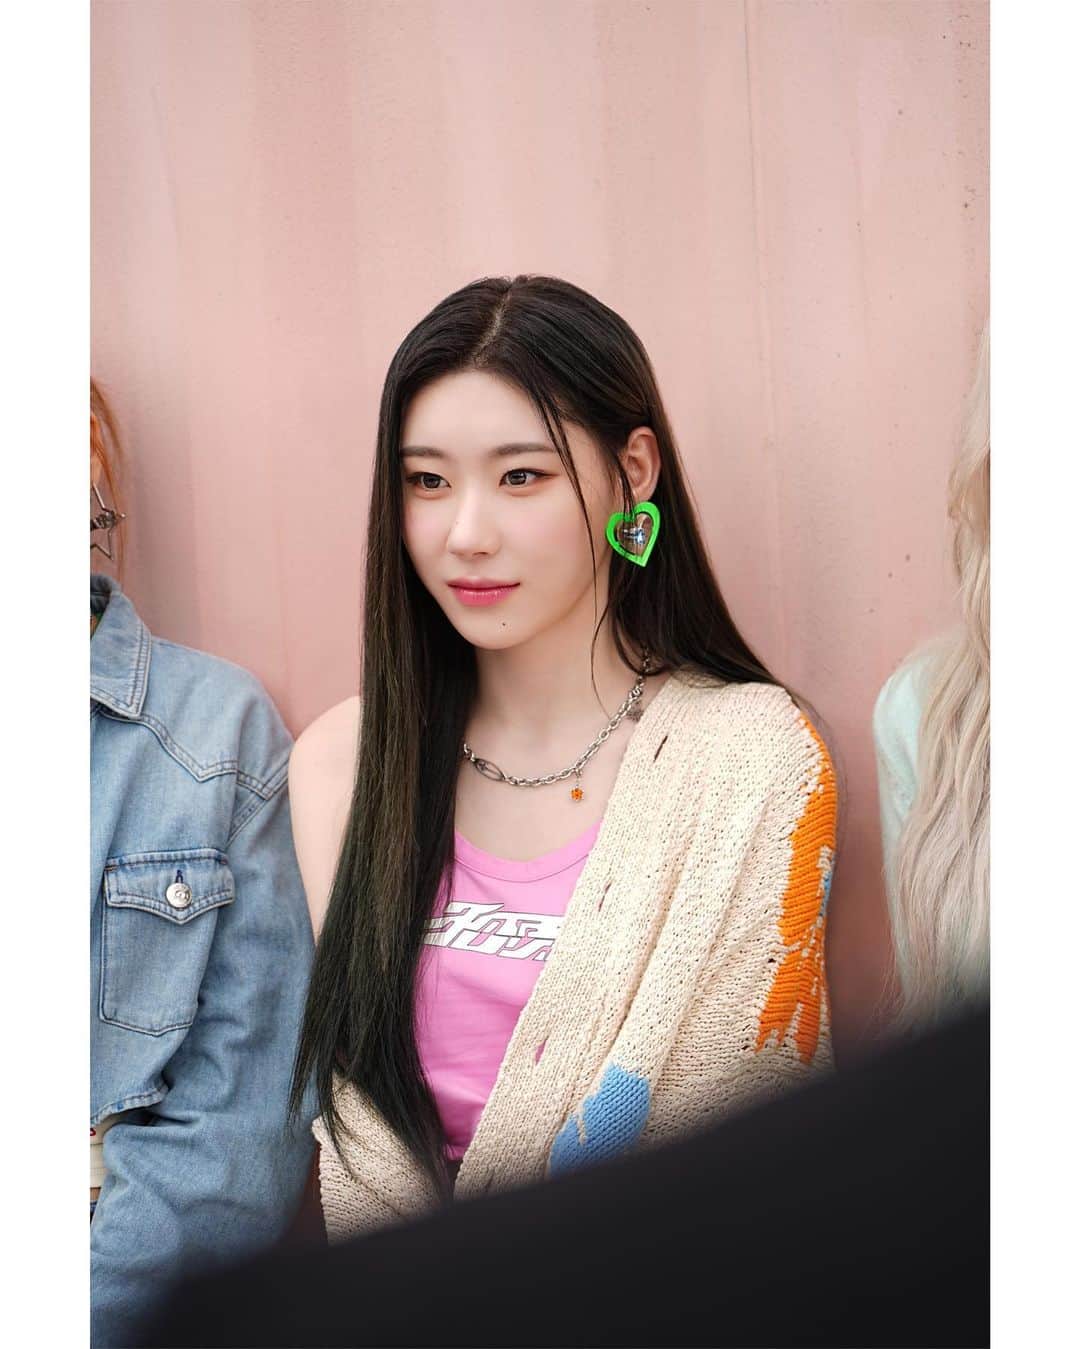 ITZYのインスタグラム：「. ITZY JAPAN 1st Album『RINGO』 Out Now  「Sugar-holic」Behind Photo📸 #CHAERYEONG  #ITZY #RINGO #ITZY_RINGO #Sugarholic」